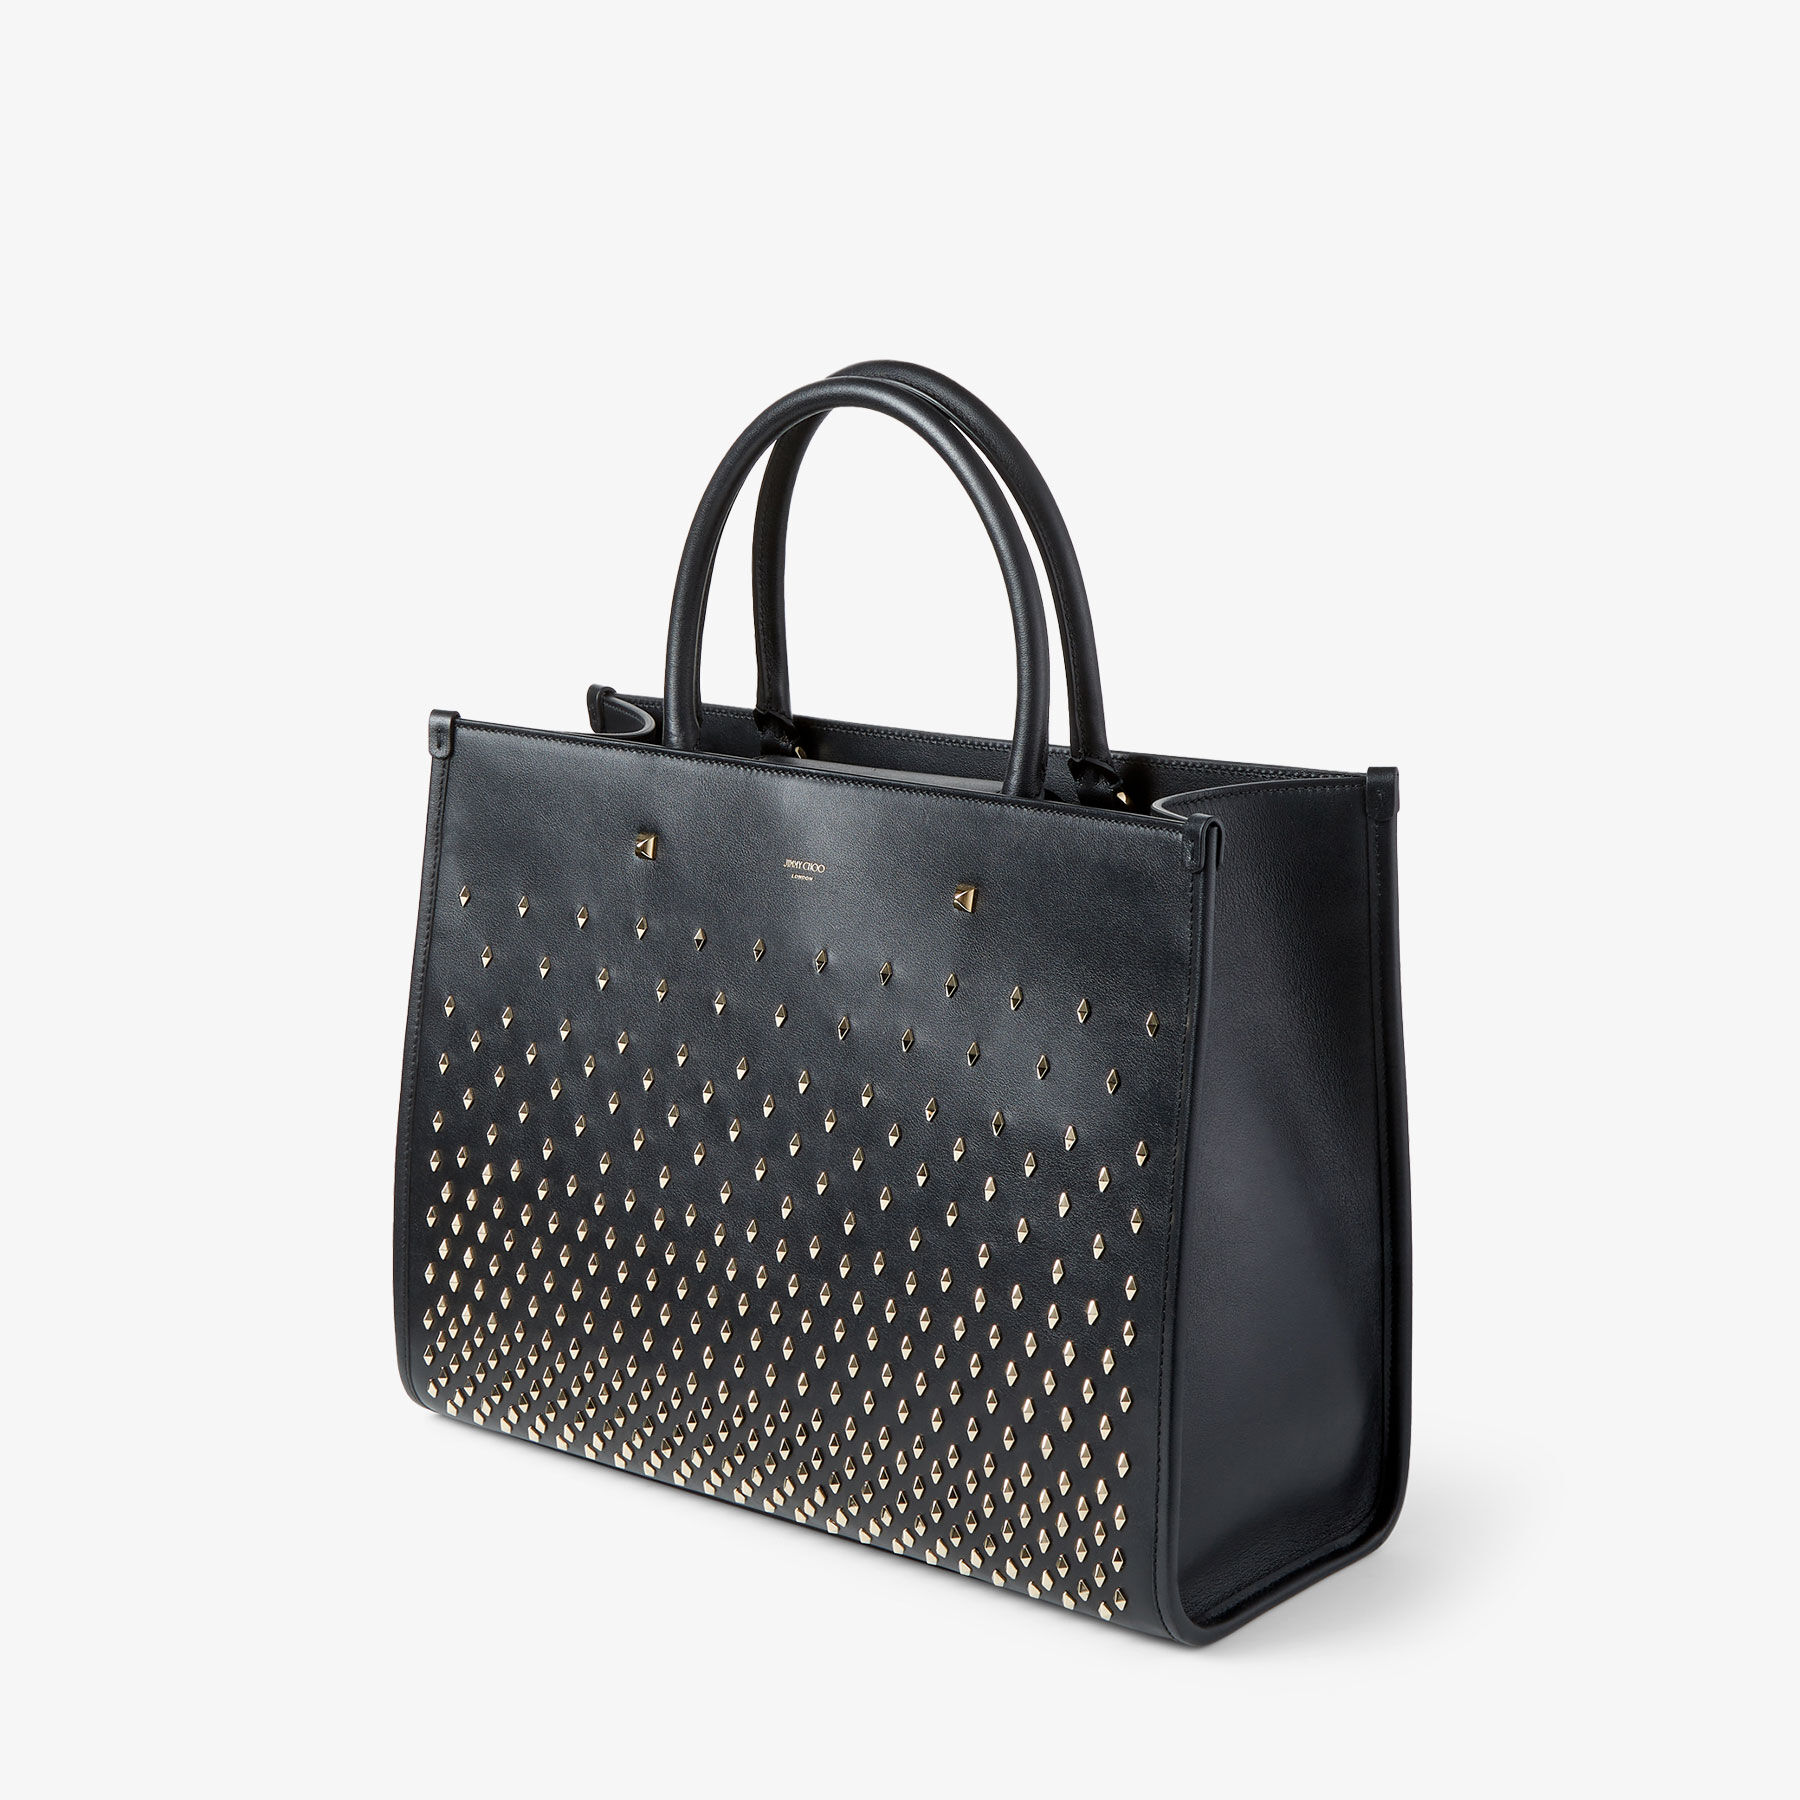 VARENNE M TOTE | Black Leather Tote Bag with Studs | Summer 